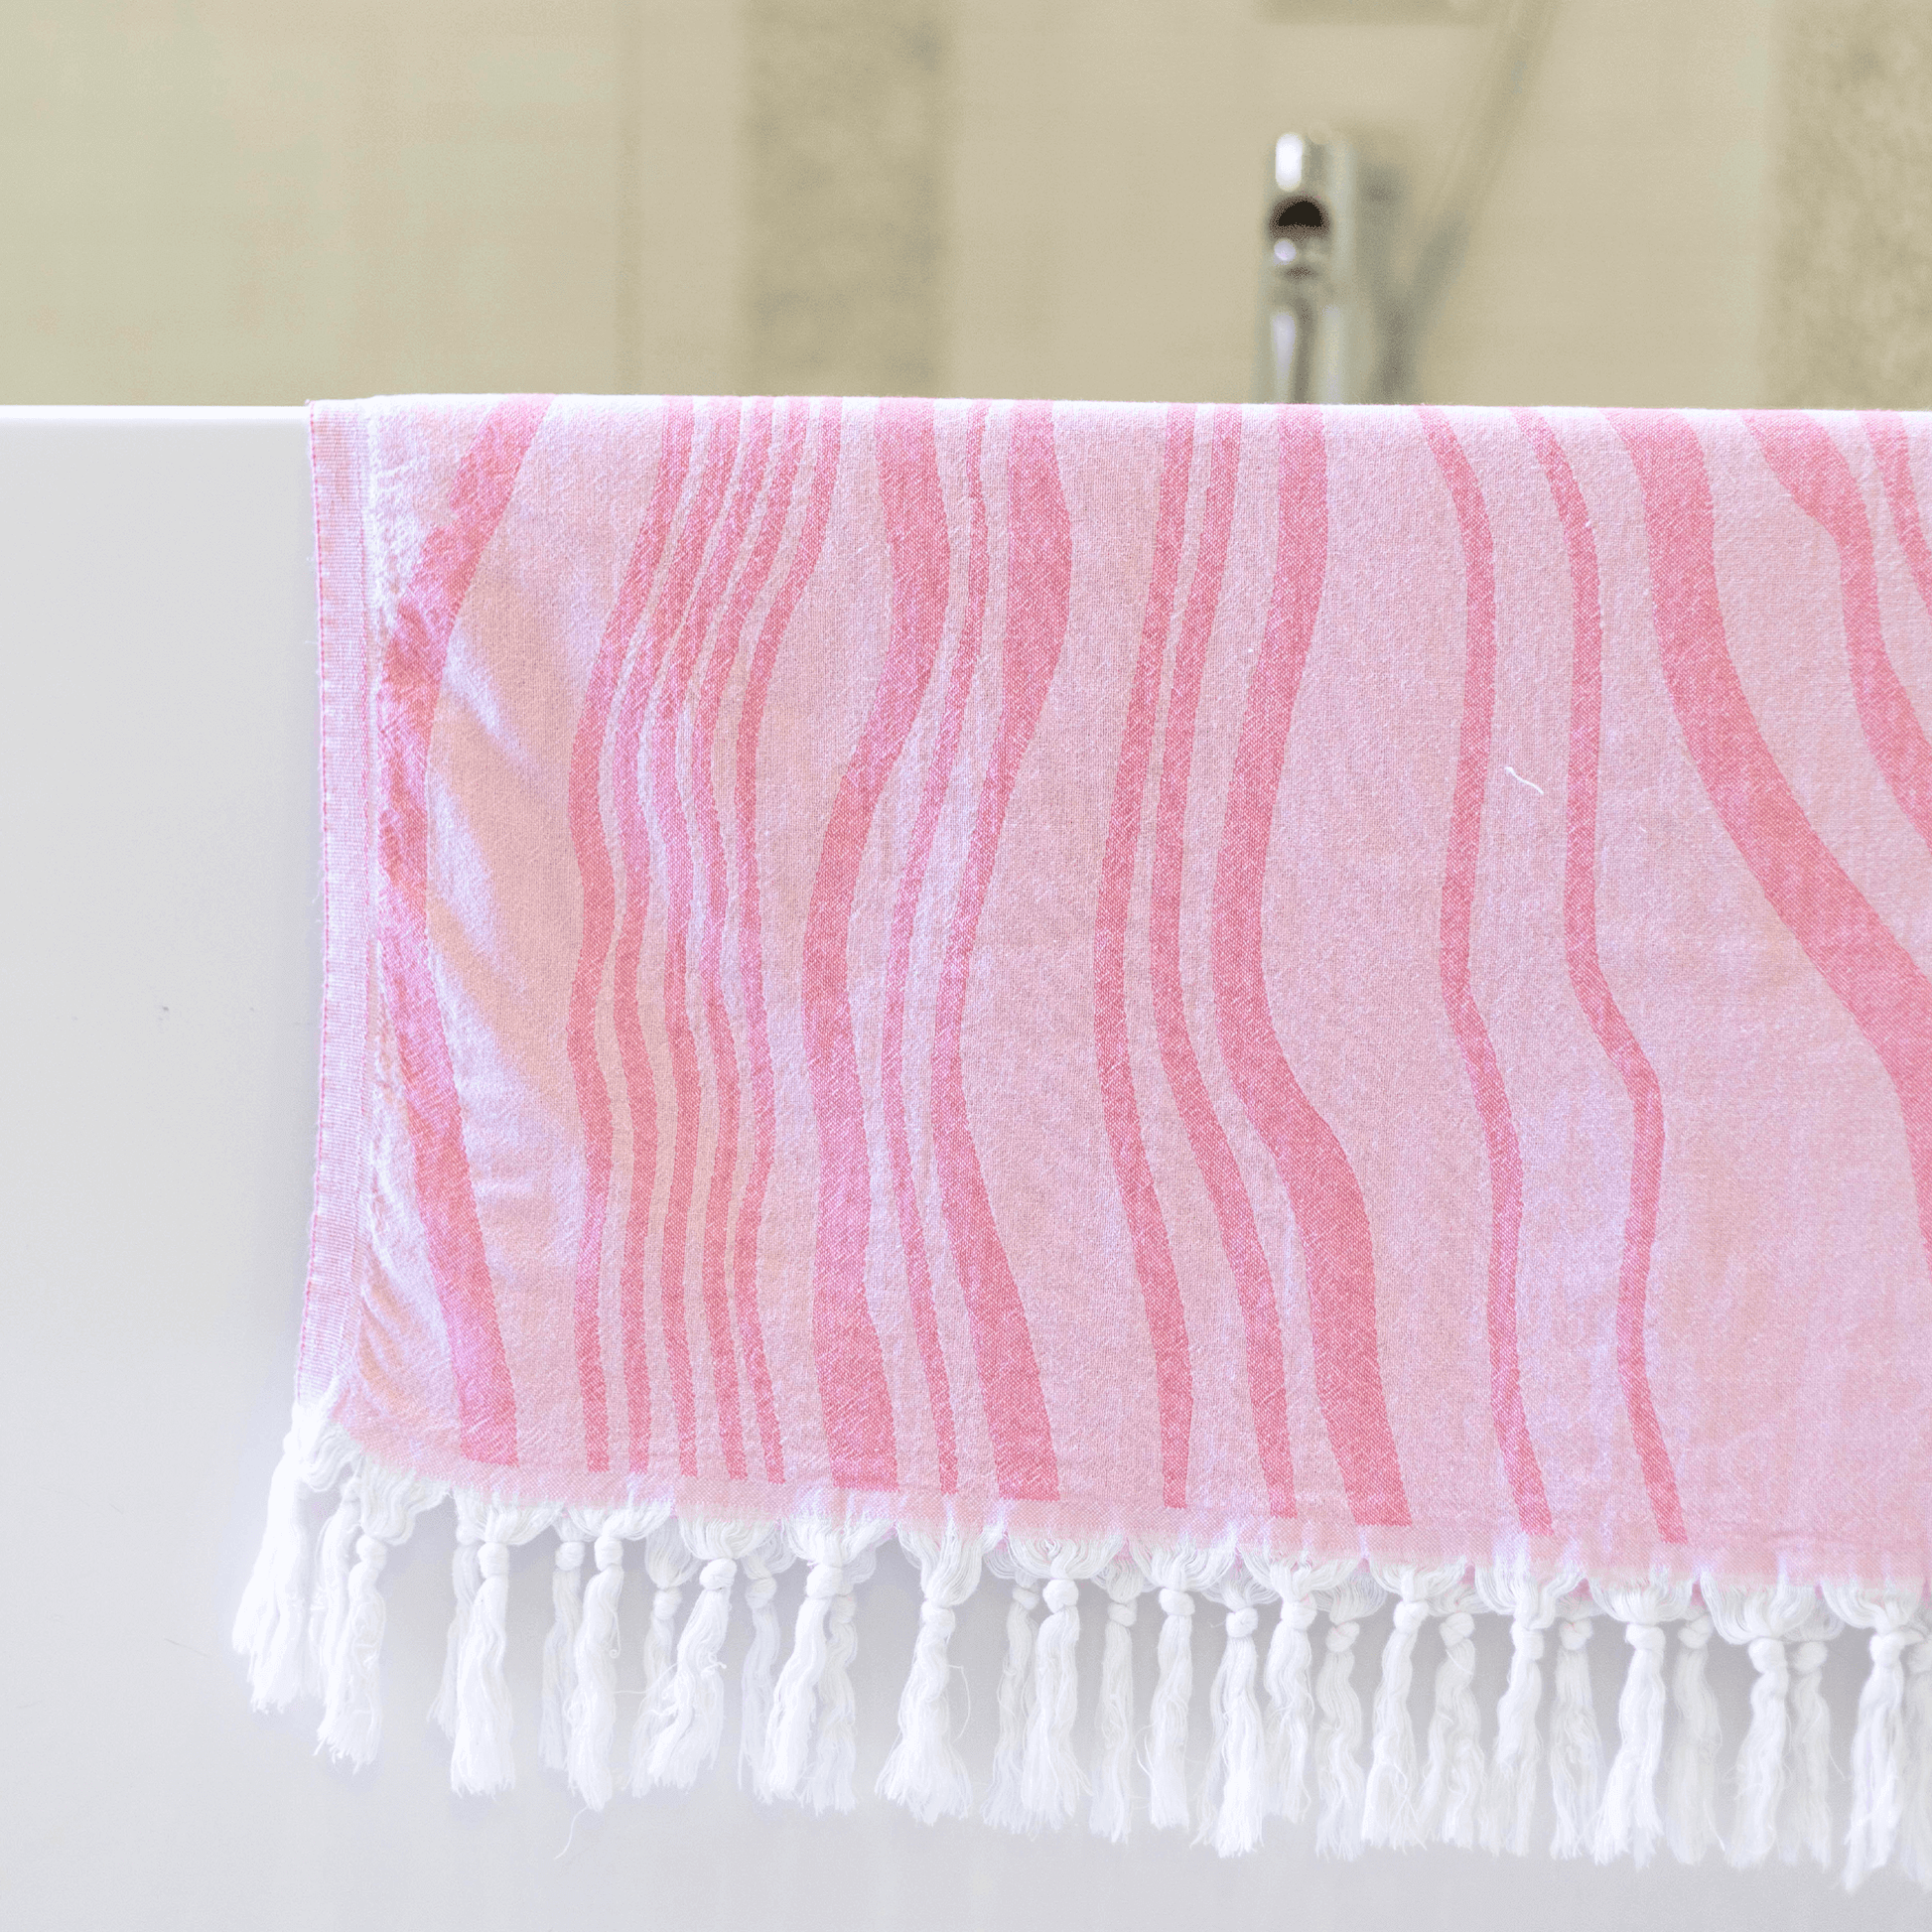 Pink stripped Turkish towel in the bath